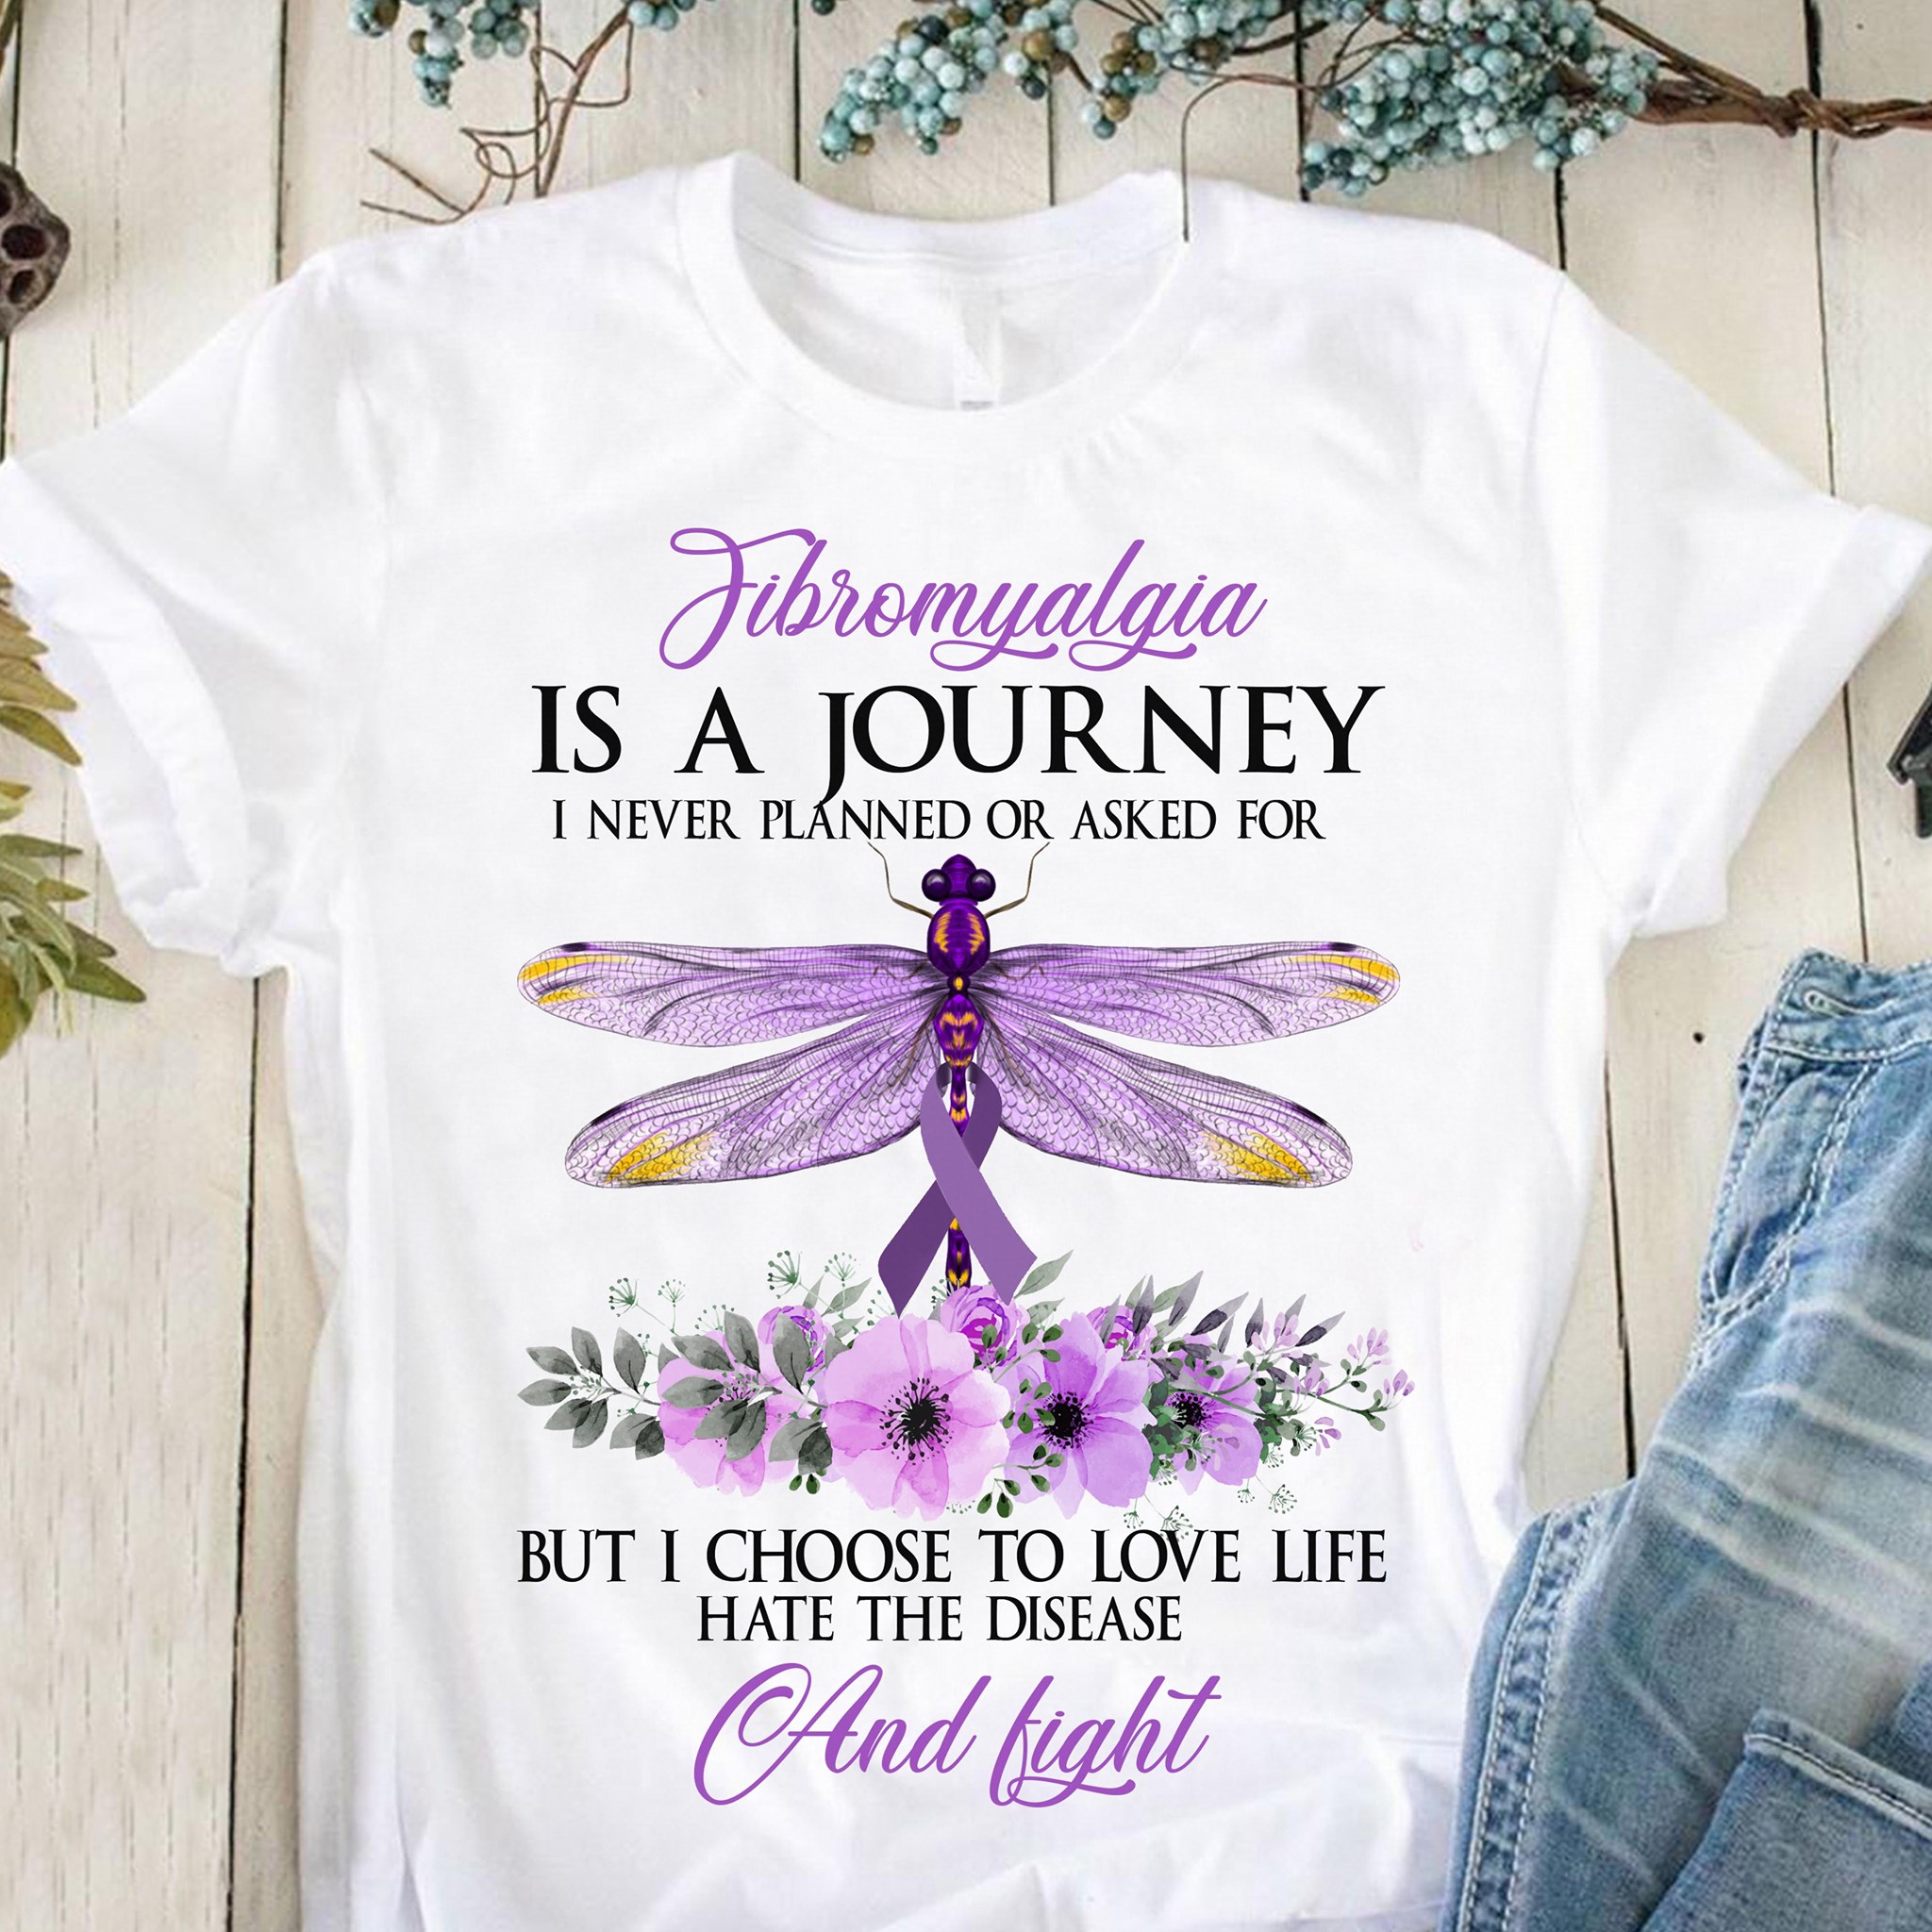 Fibromyalgia is a journey I never planned or asked for but I choose to love life hate the disease and fight - Dragon fly